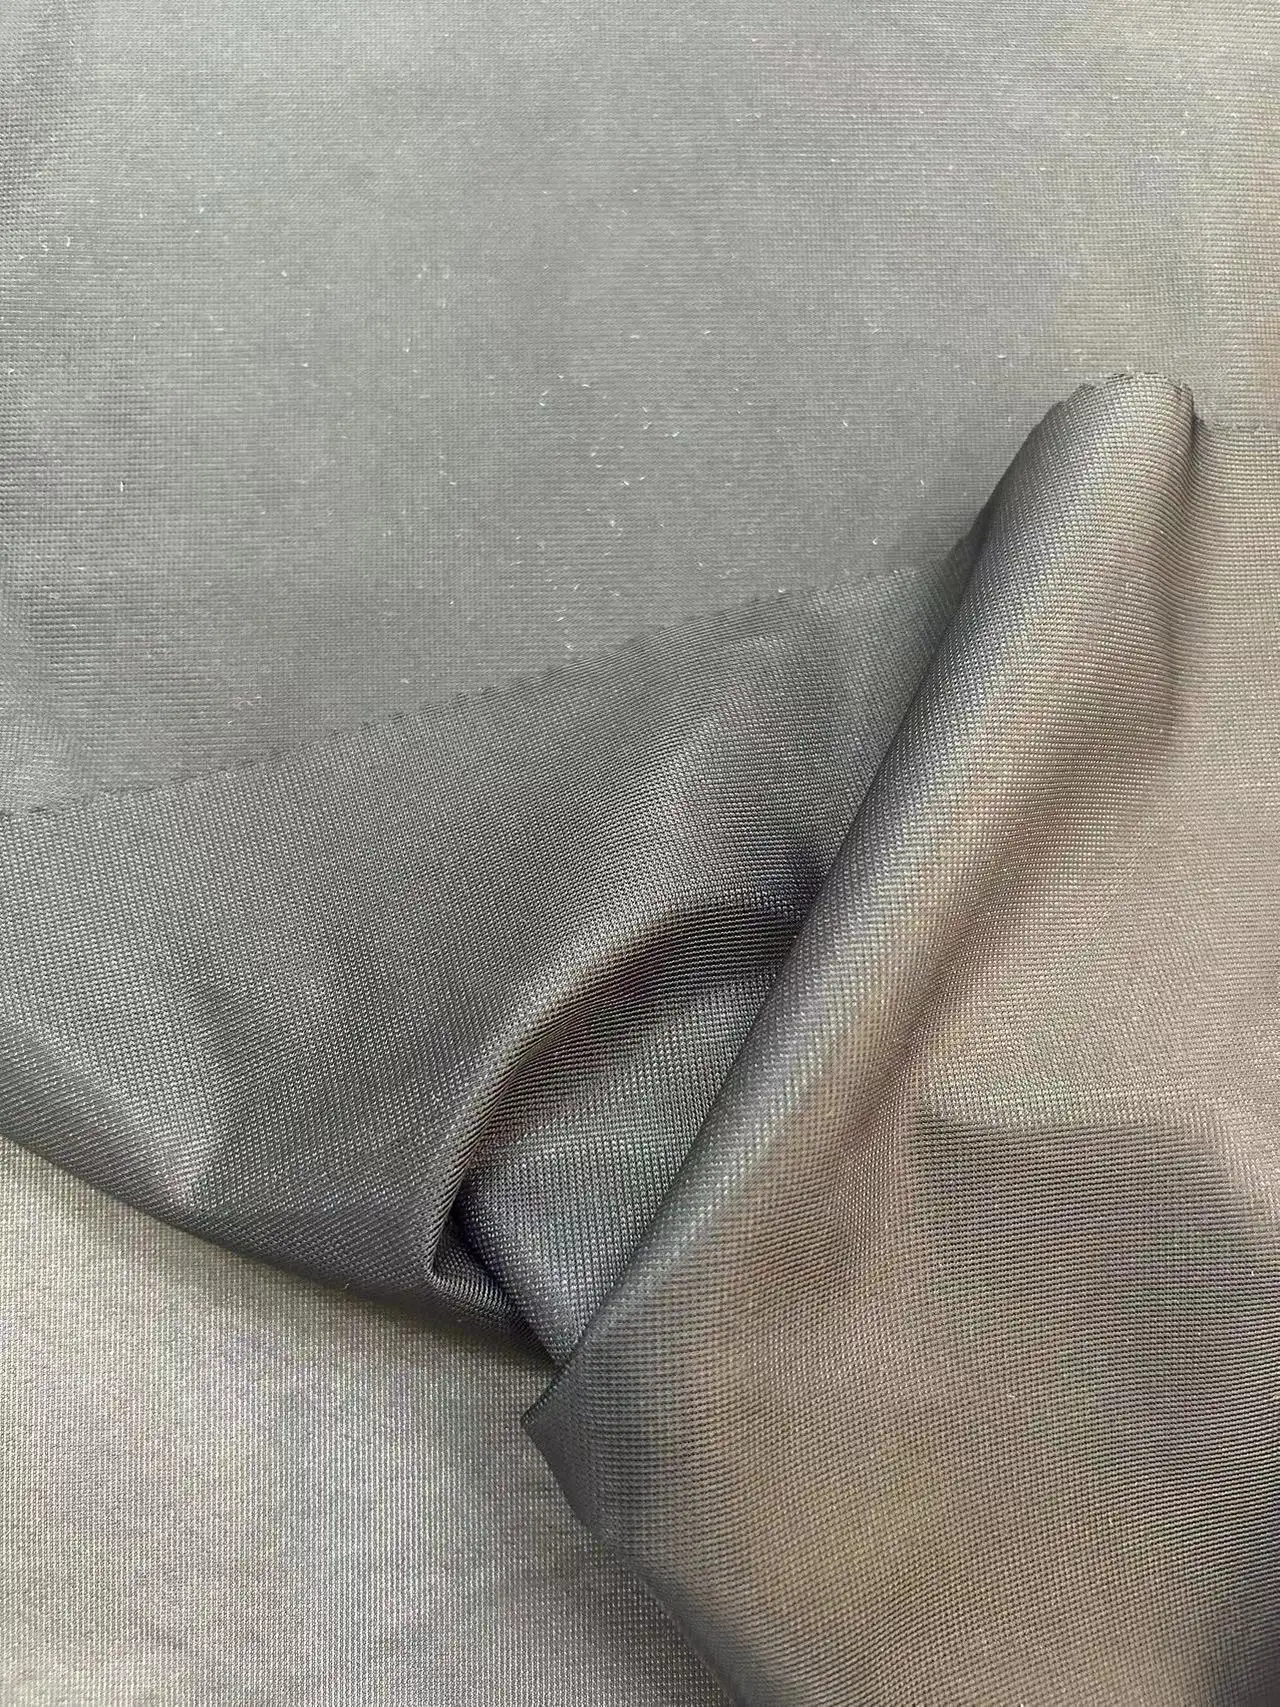 Siyuanda 100%polyester non-elastic composite fabric Garment lining Plain fabric for suits